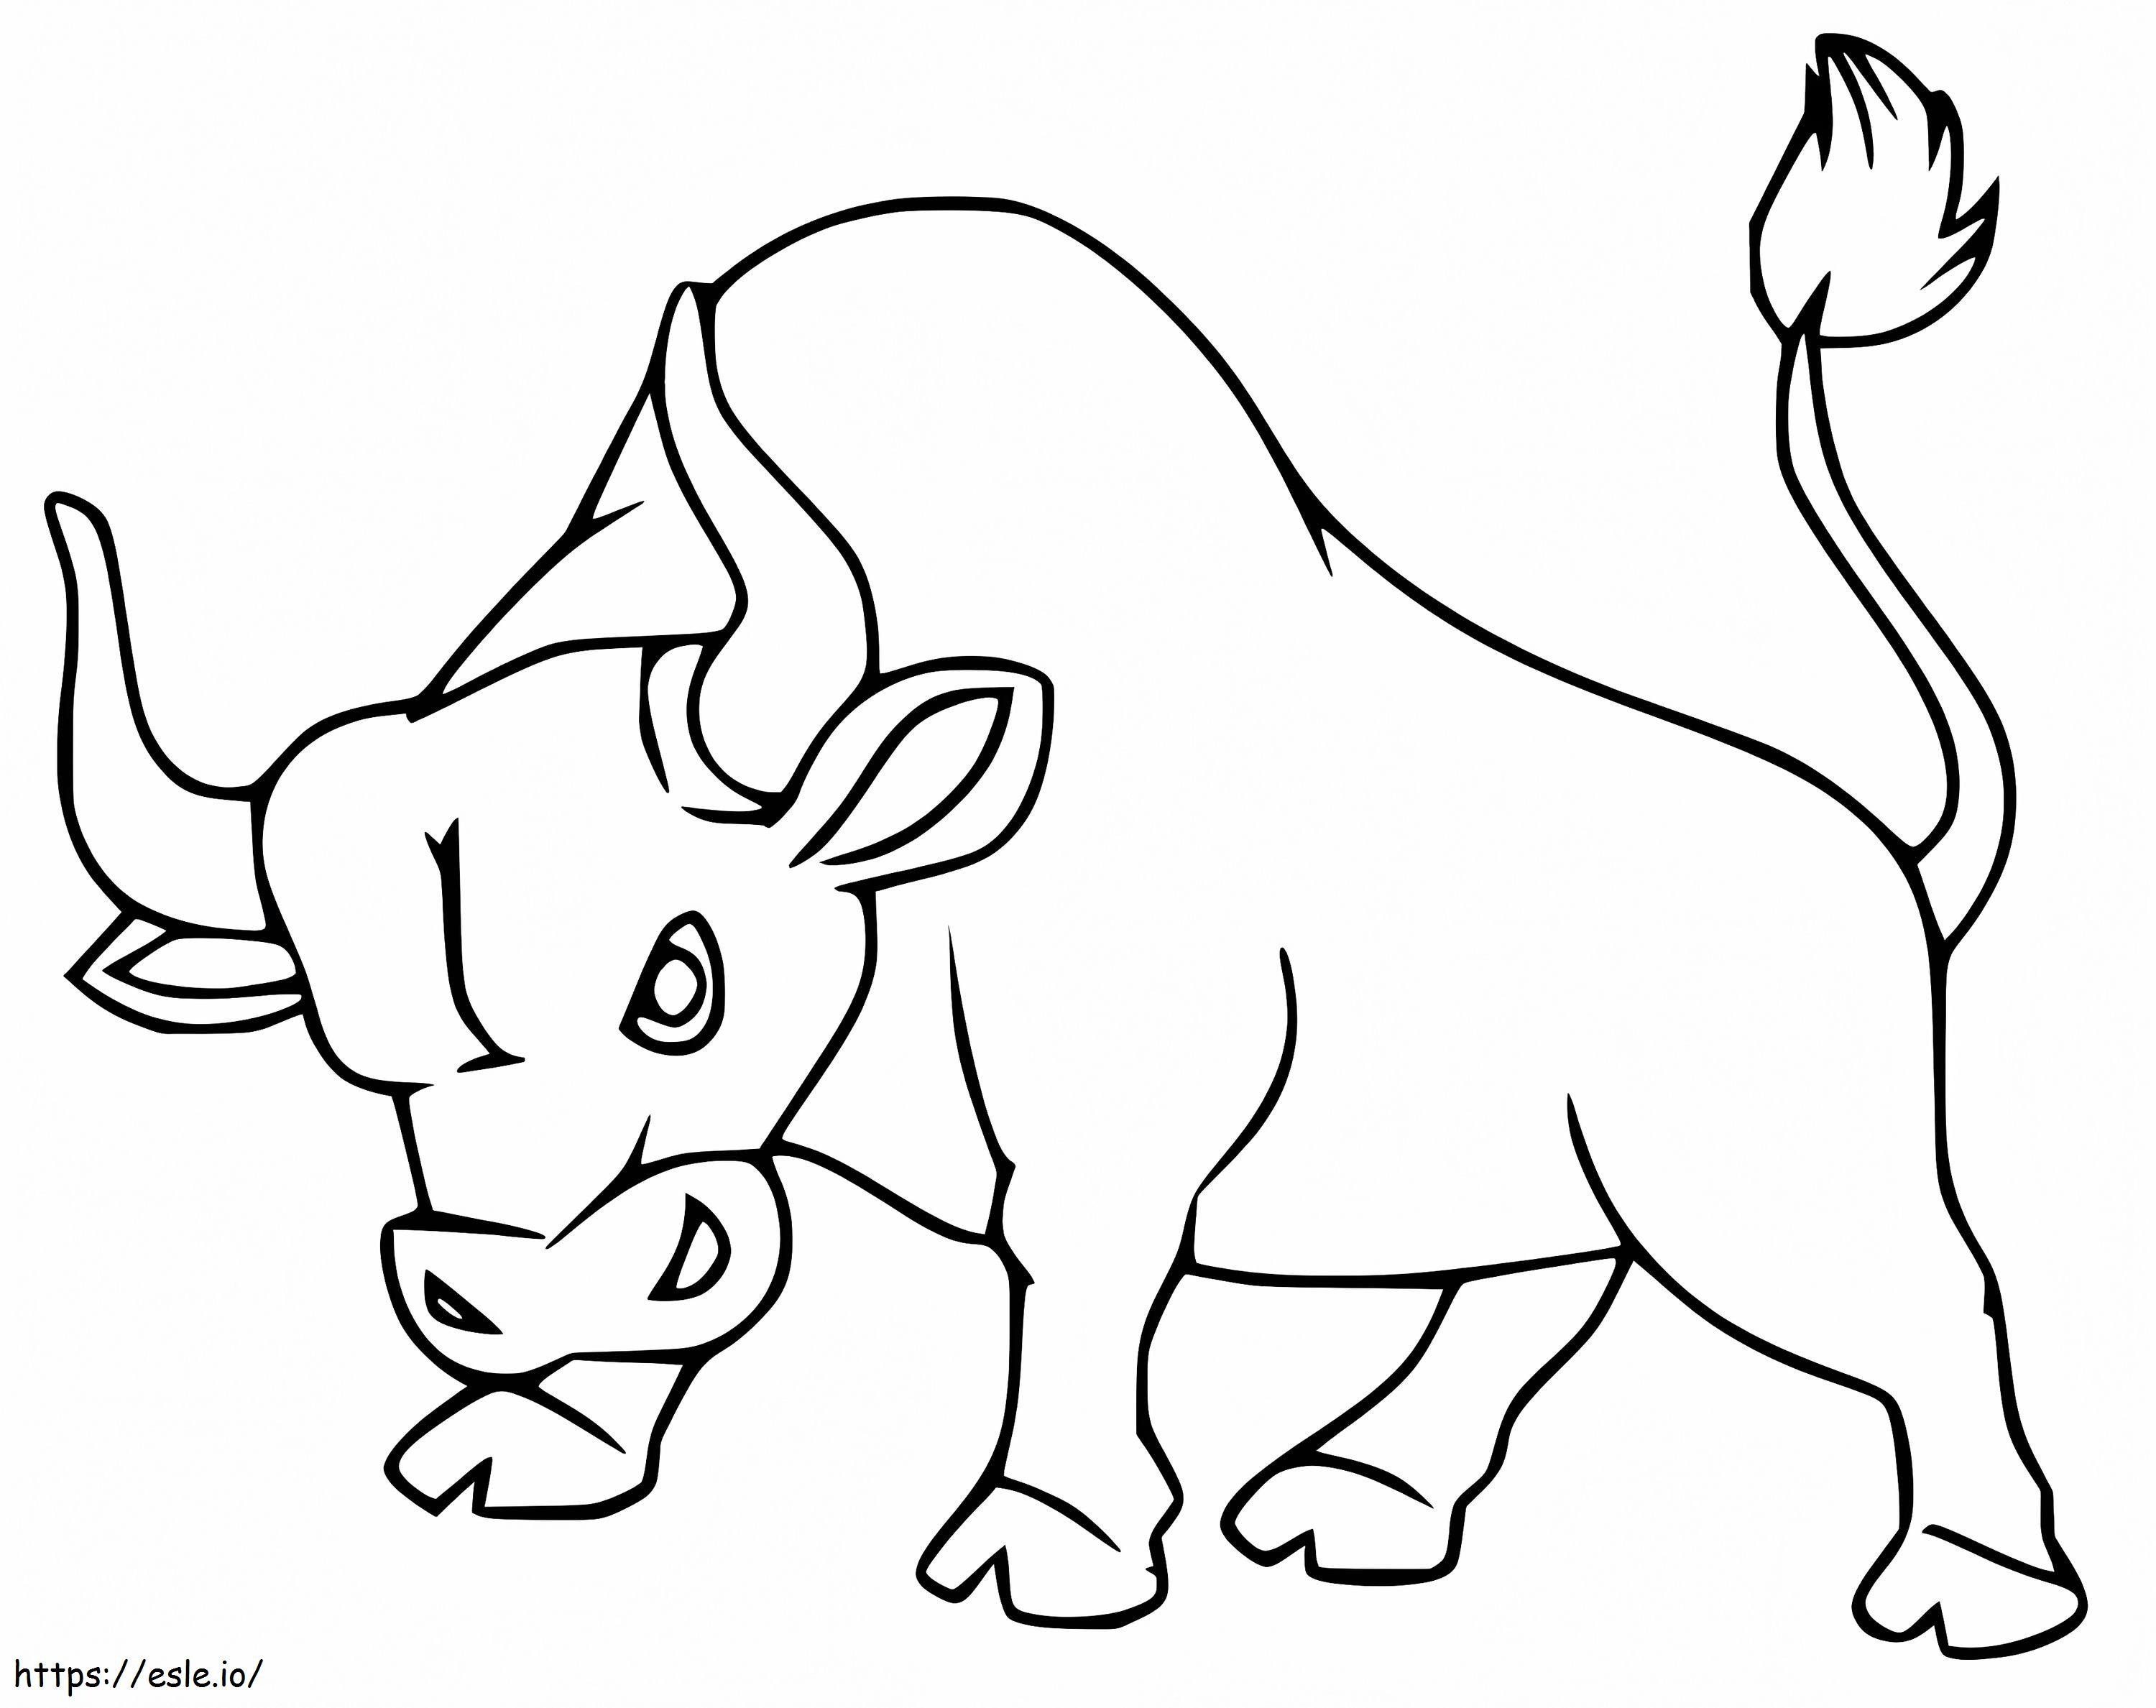 Bull Angry coloring page